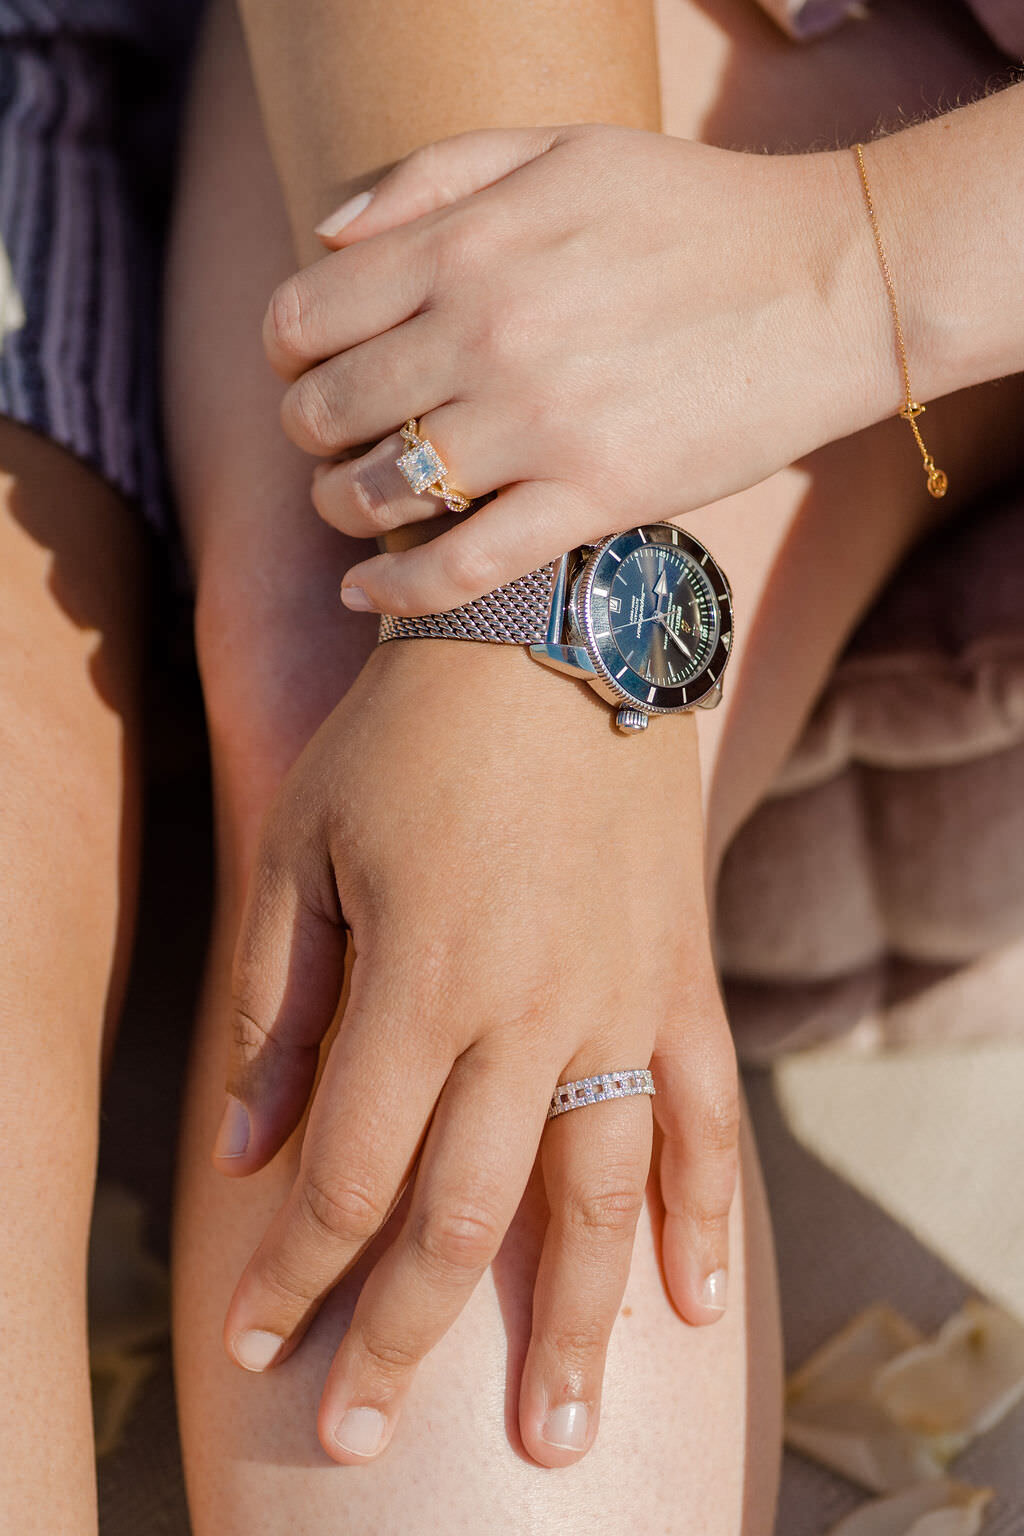 woman's hand on another's knee with both of their hands on top of each other showing off engagement rings